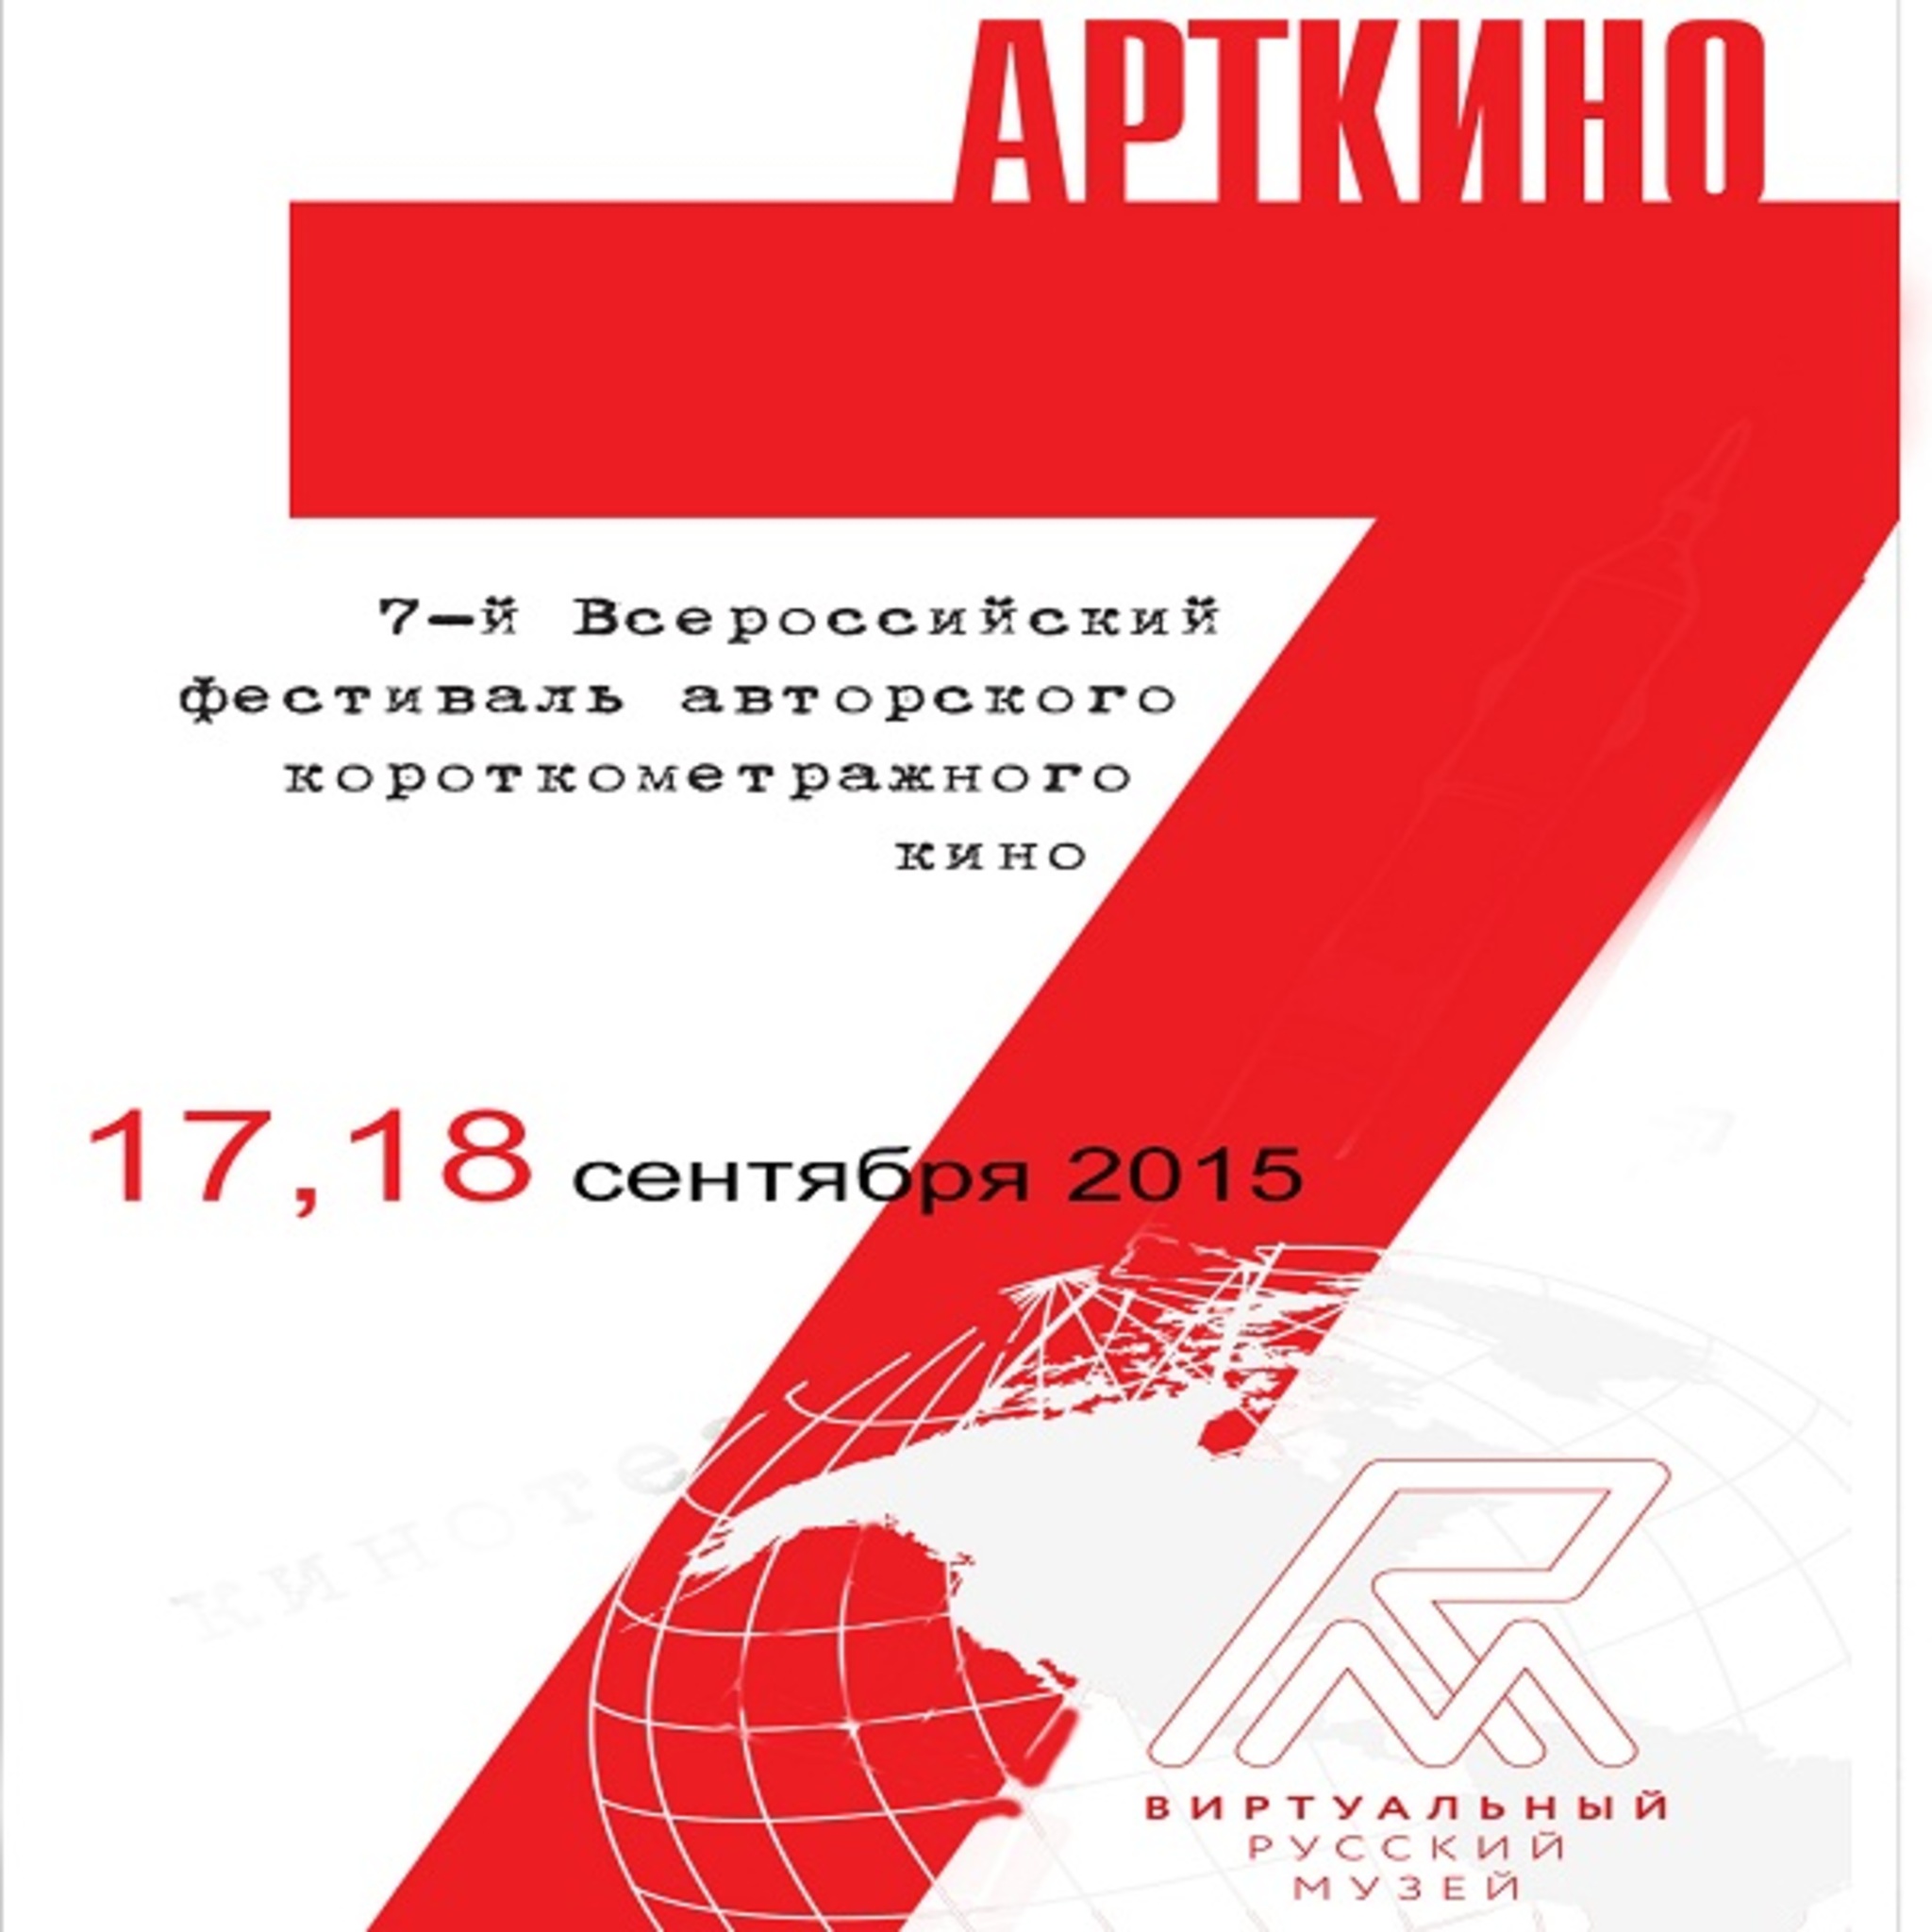 Showing a competitive program VII All-Russia festival of art of short films ARTkino